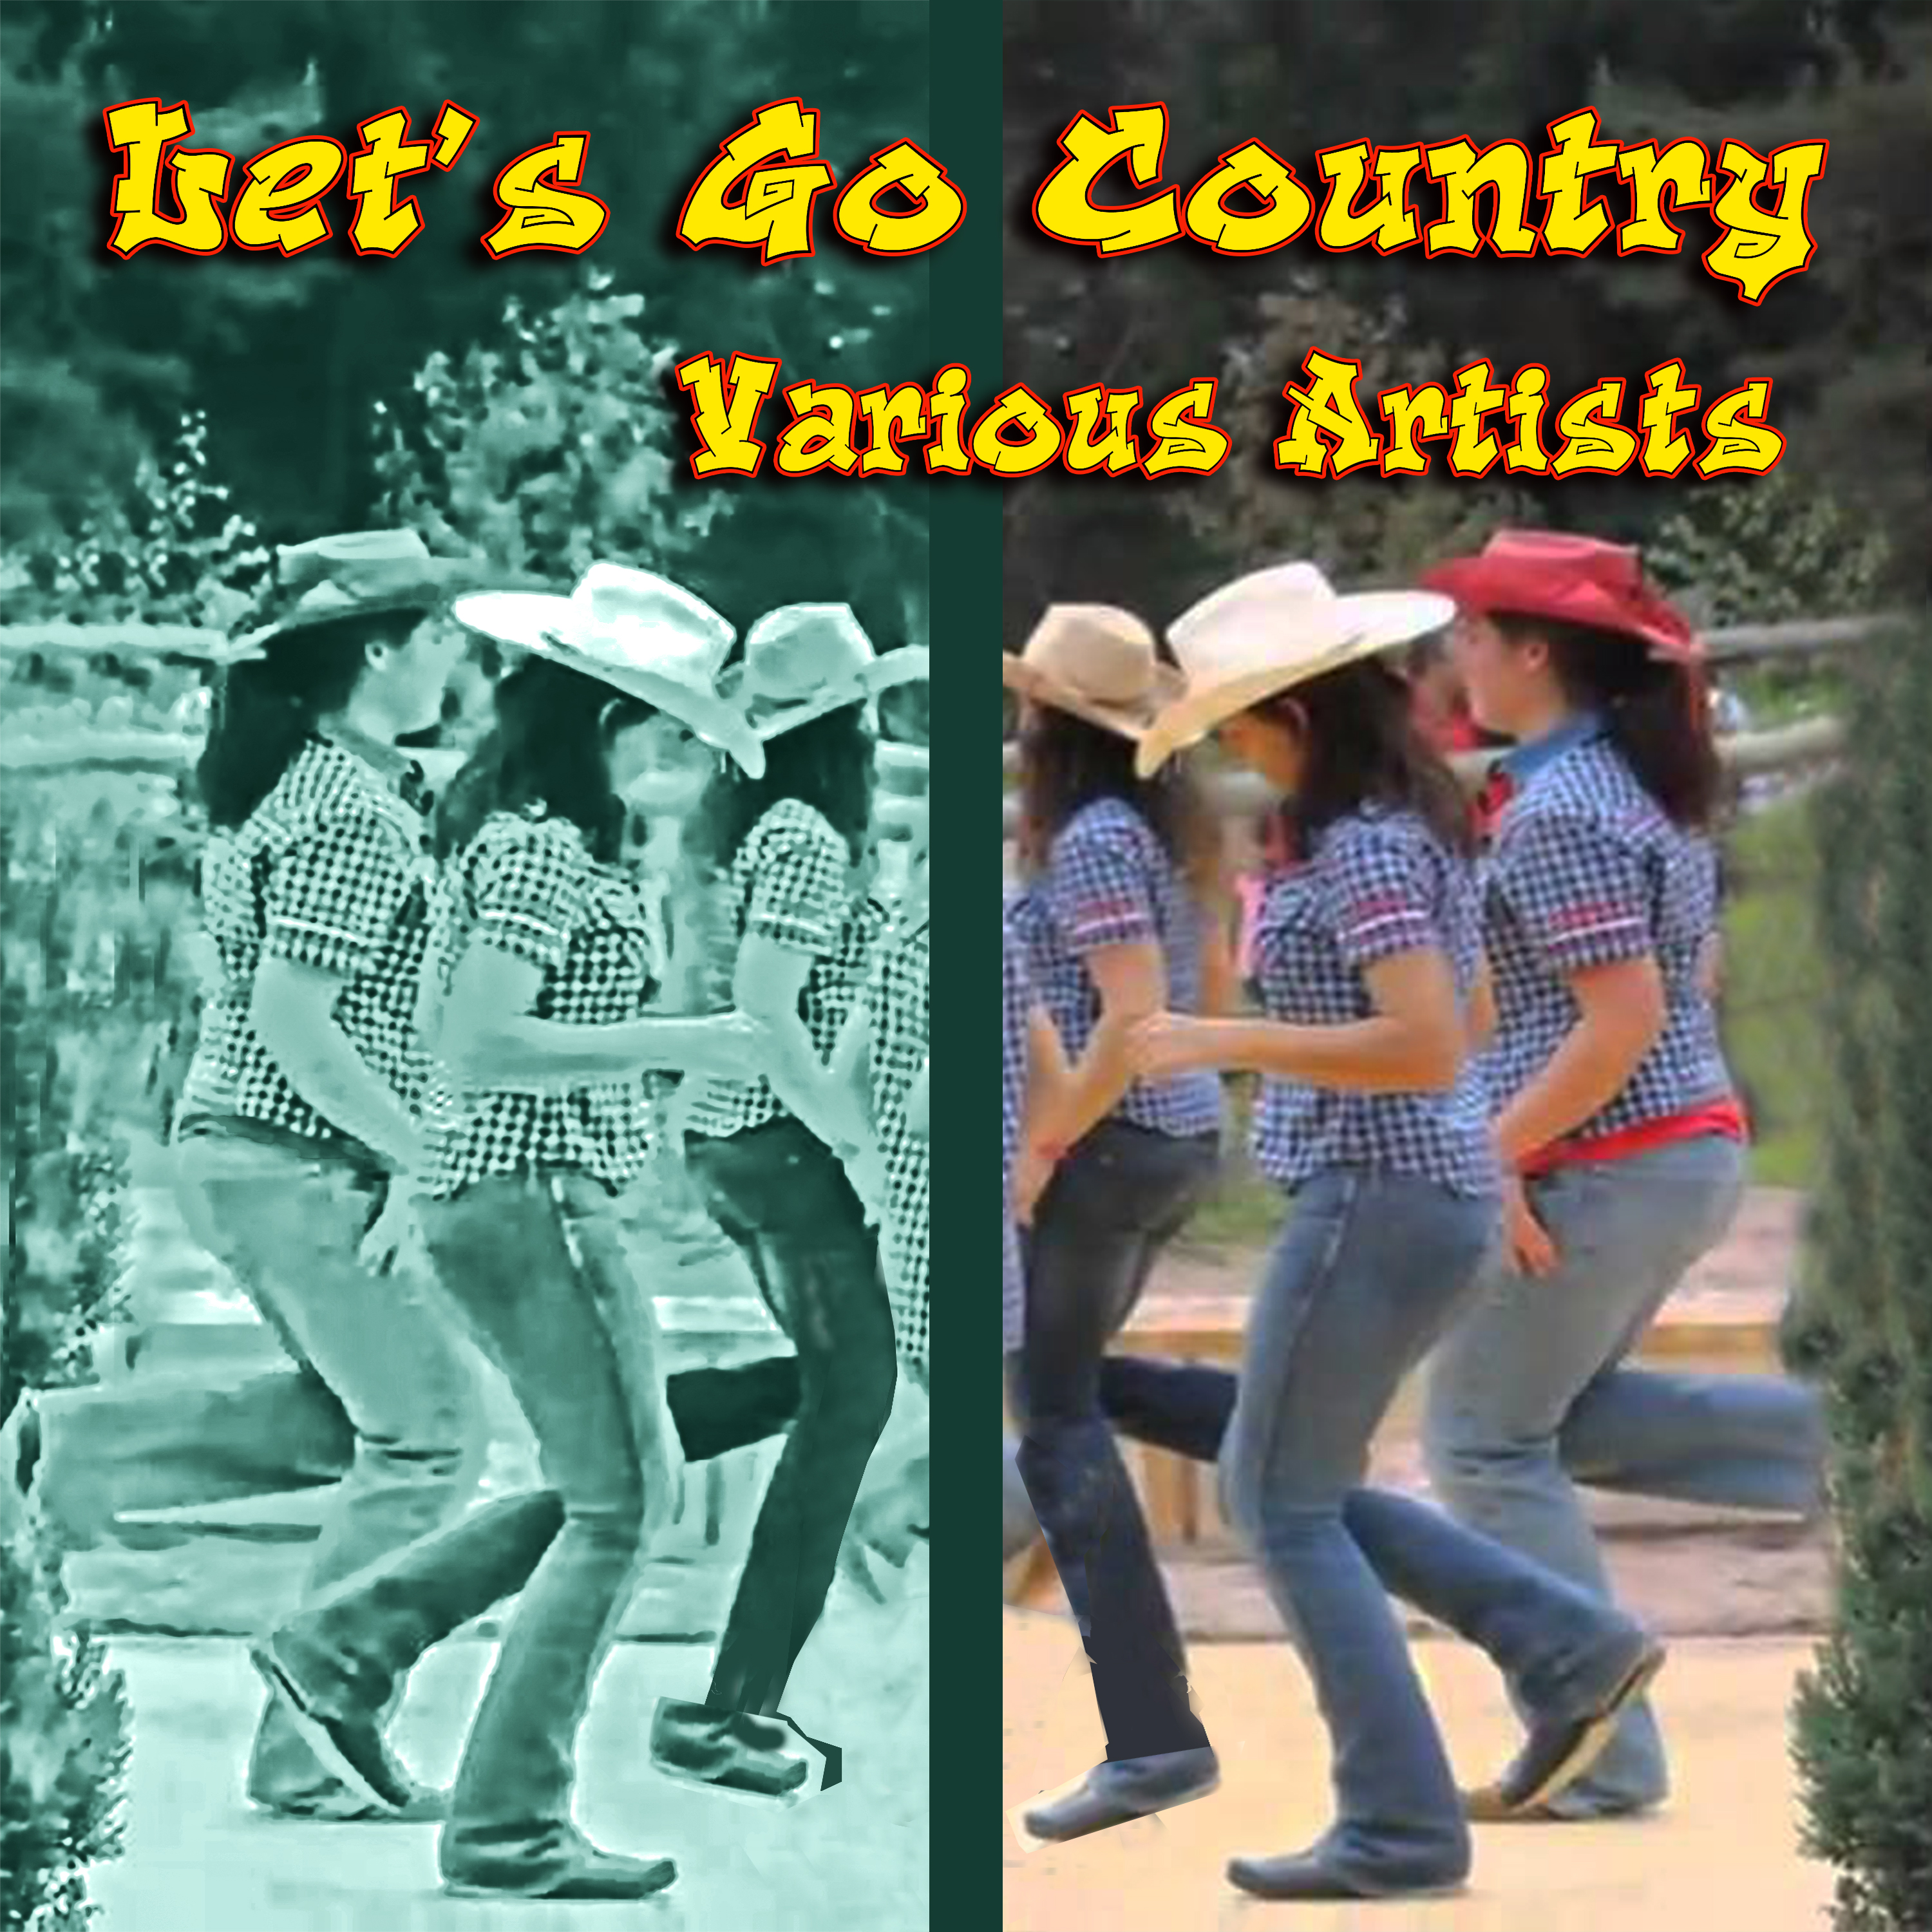 Let's Go Country